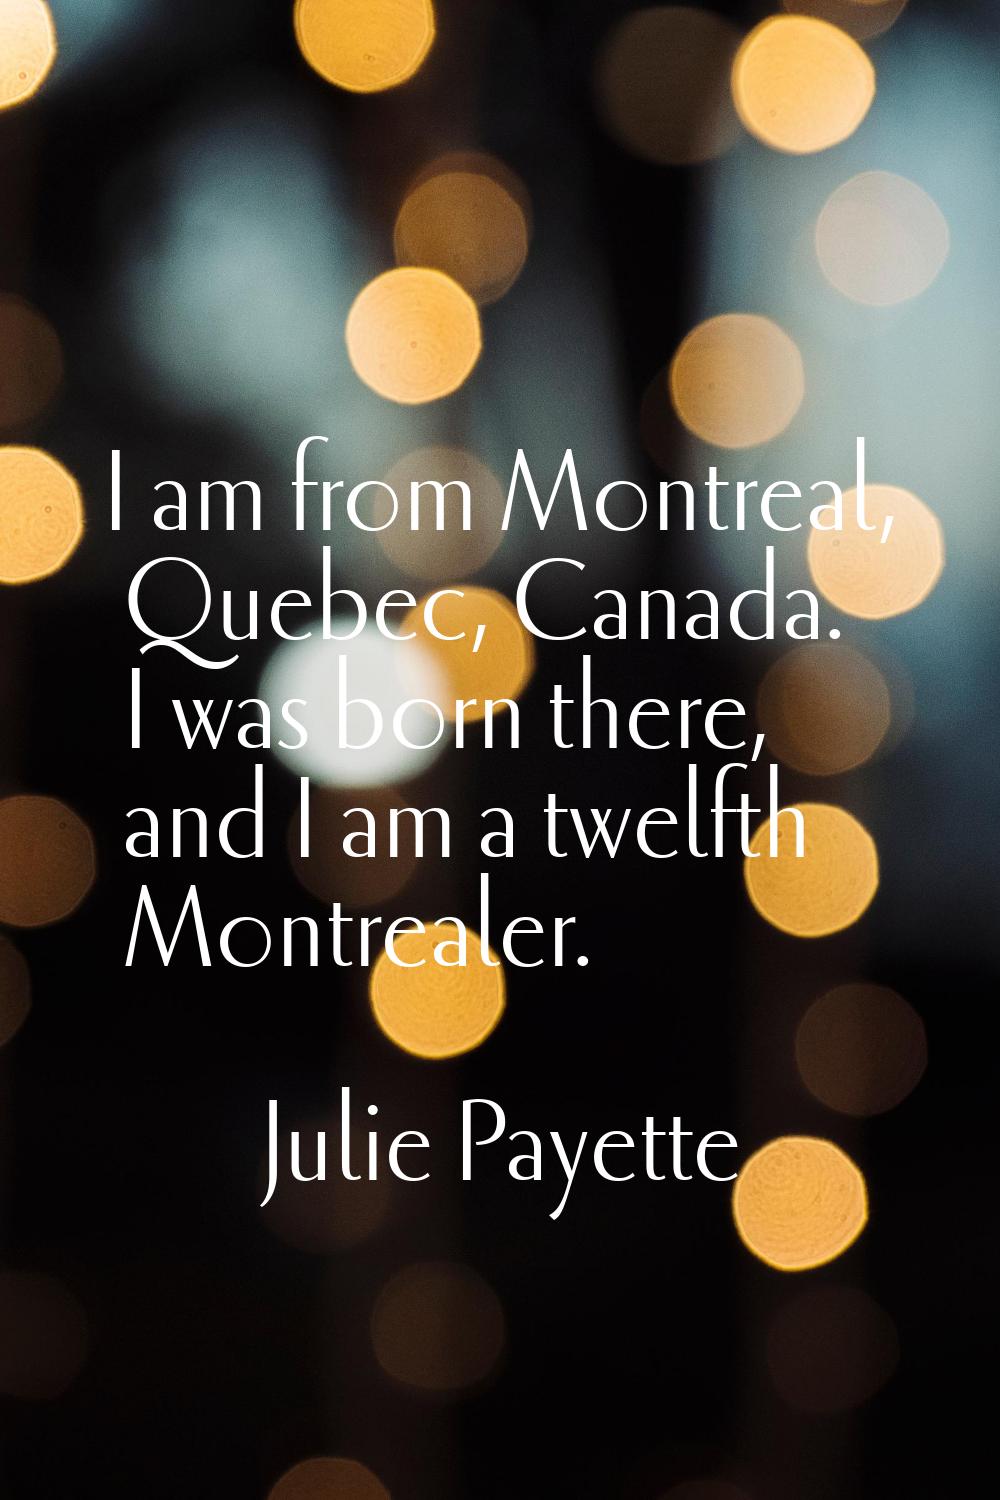 I am from Montreal, Quebec, Canada. I was born there, and I am a twelfth Montrealer.